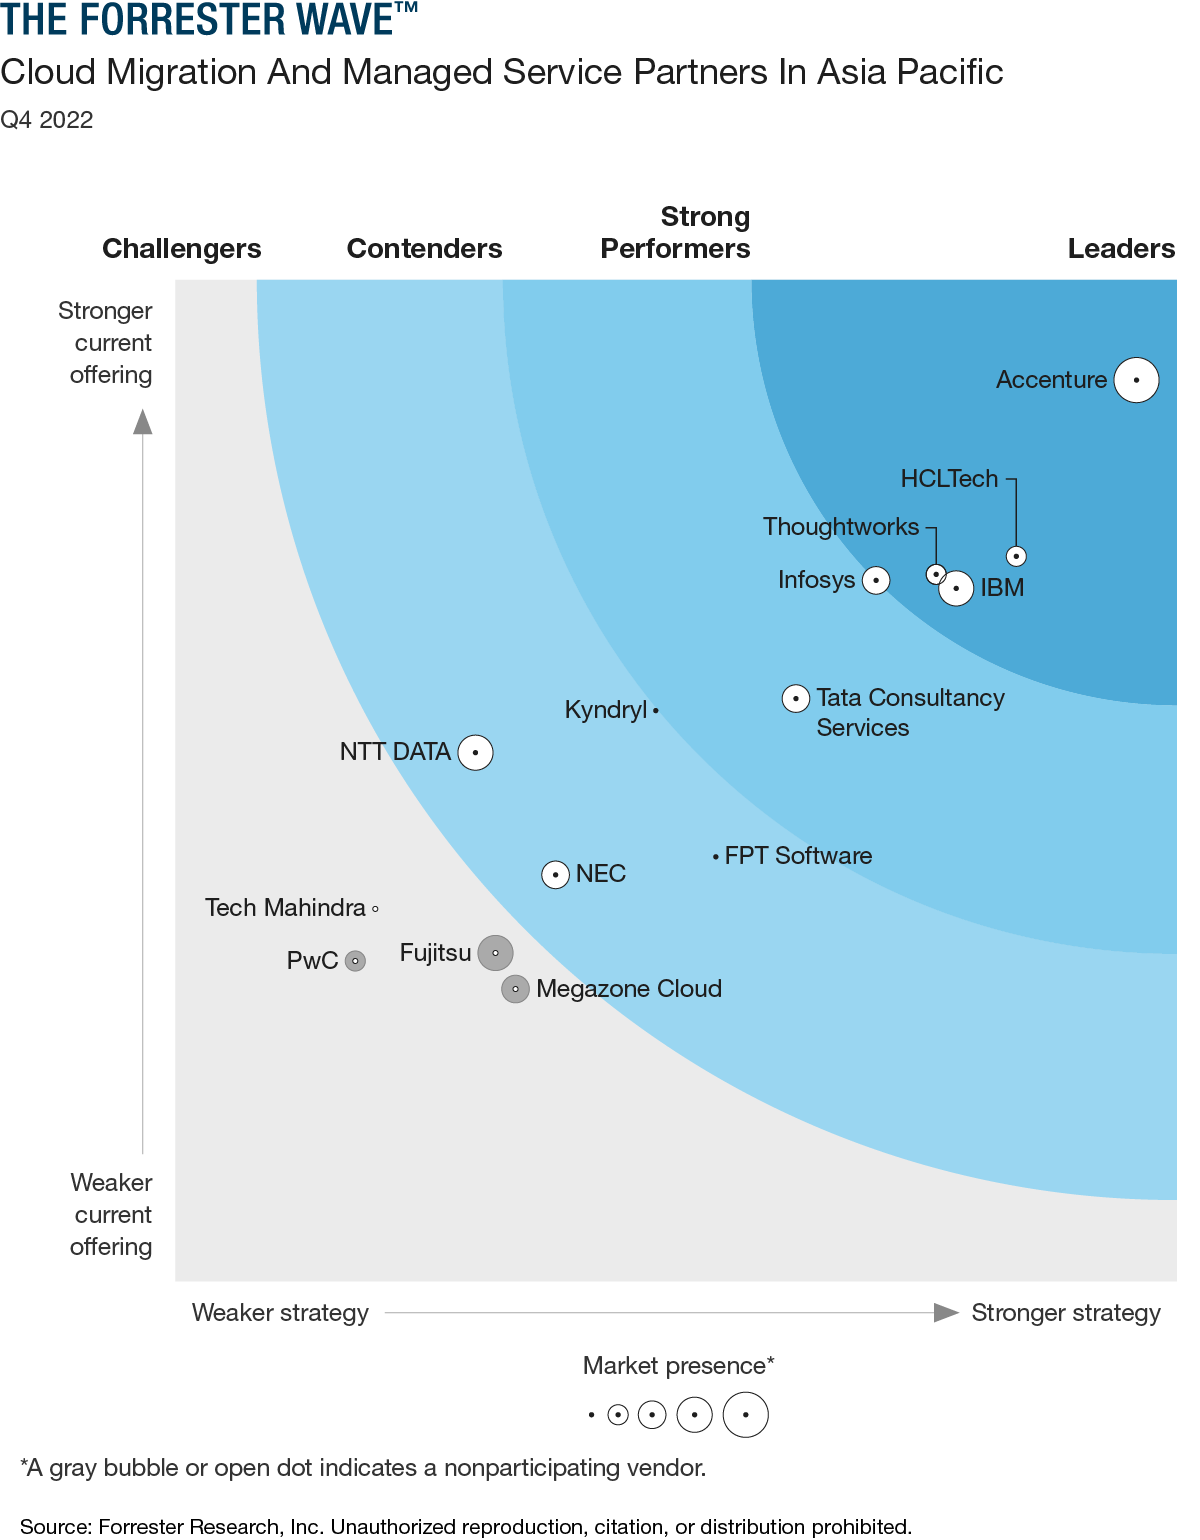 HCLTech Positioned As A Leader In The Forrester Wave™: Cloud Migration And Managed Service Partners In Asia Pacific, Q4 2022